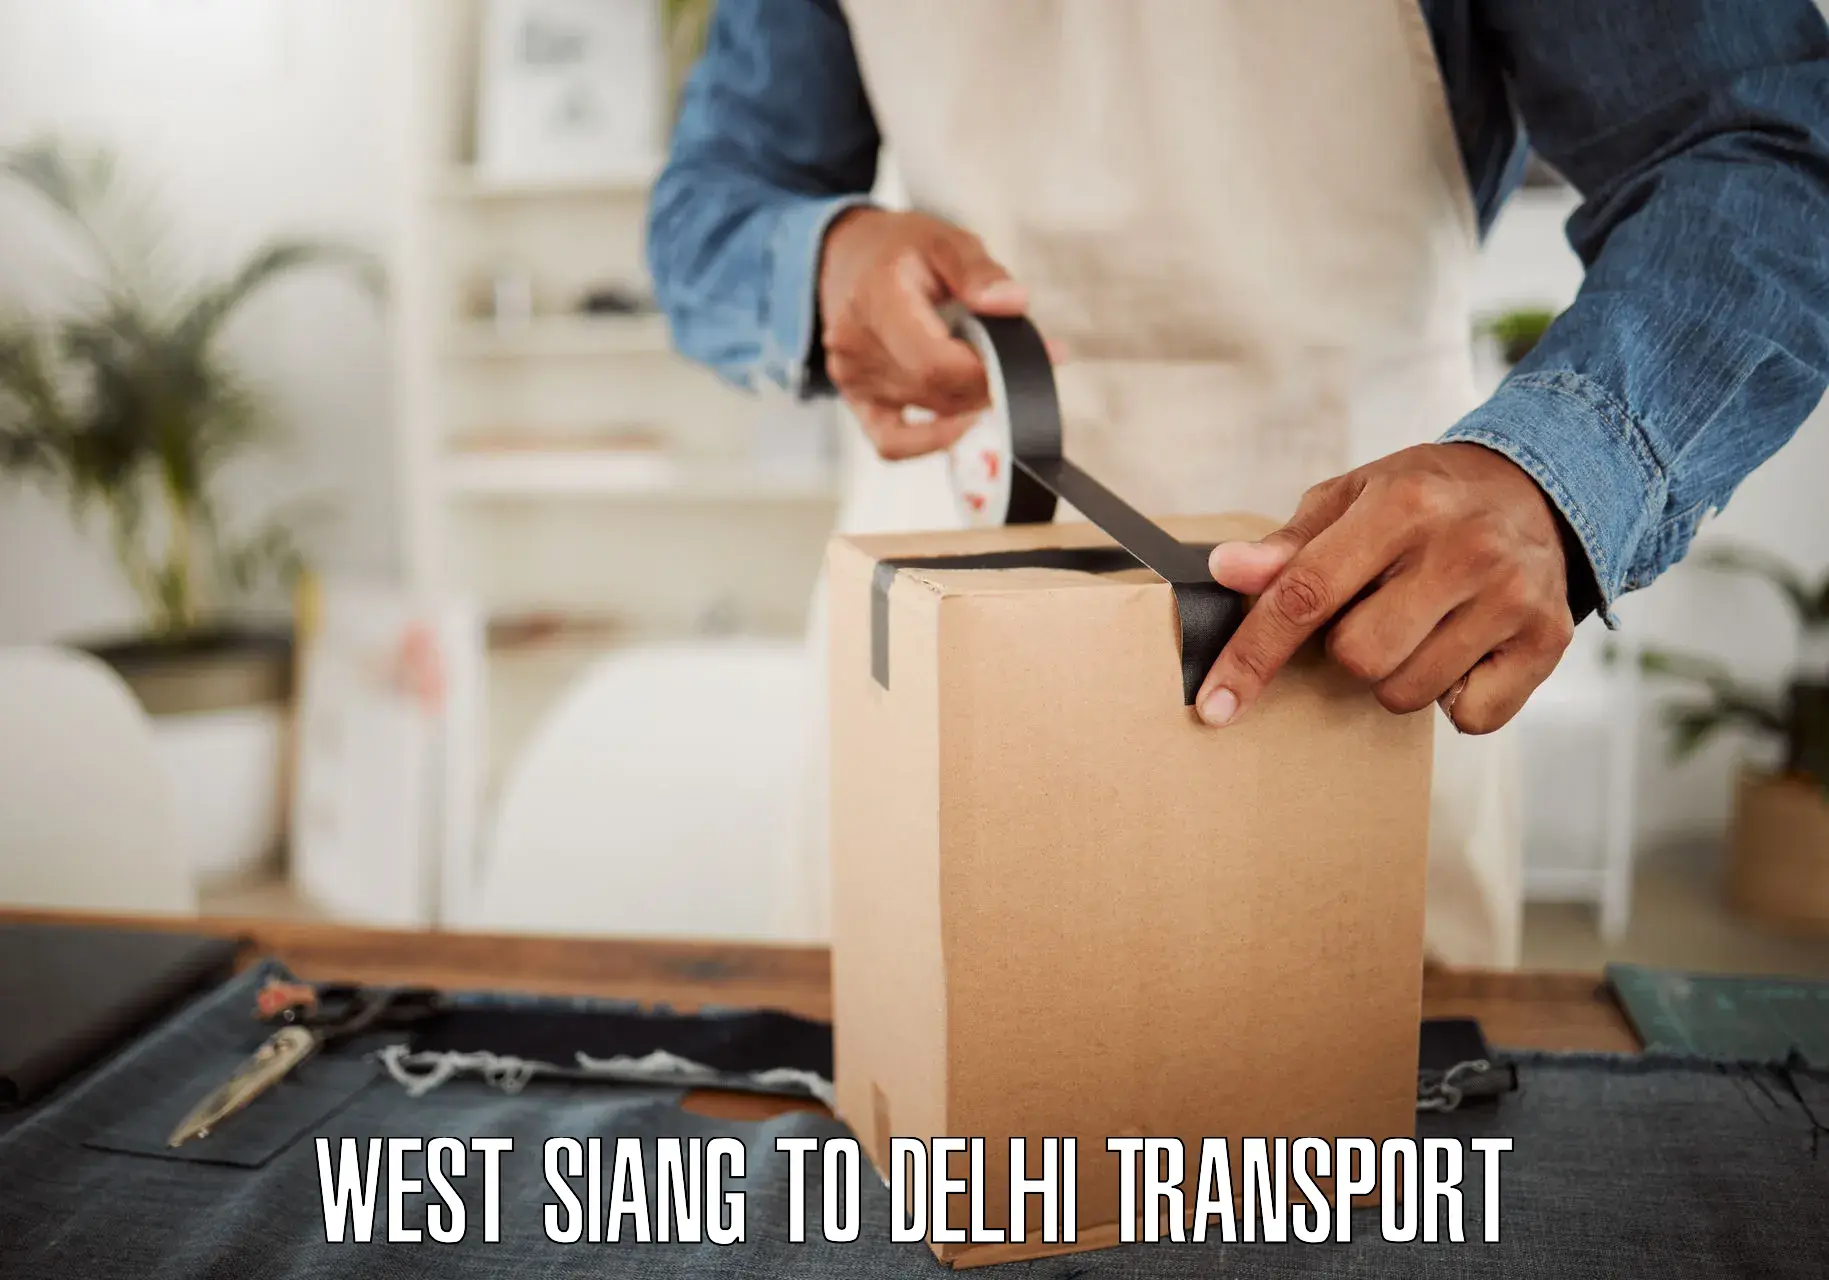 Container transport service West Siang to Delhi Technological University DTU